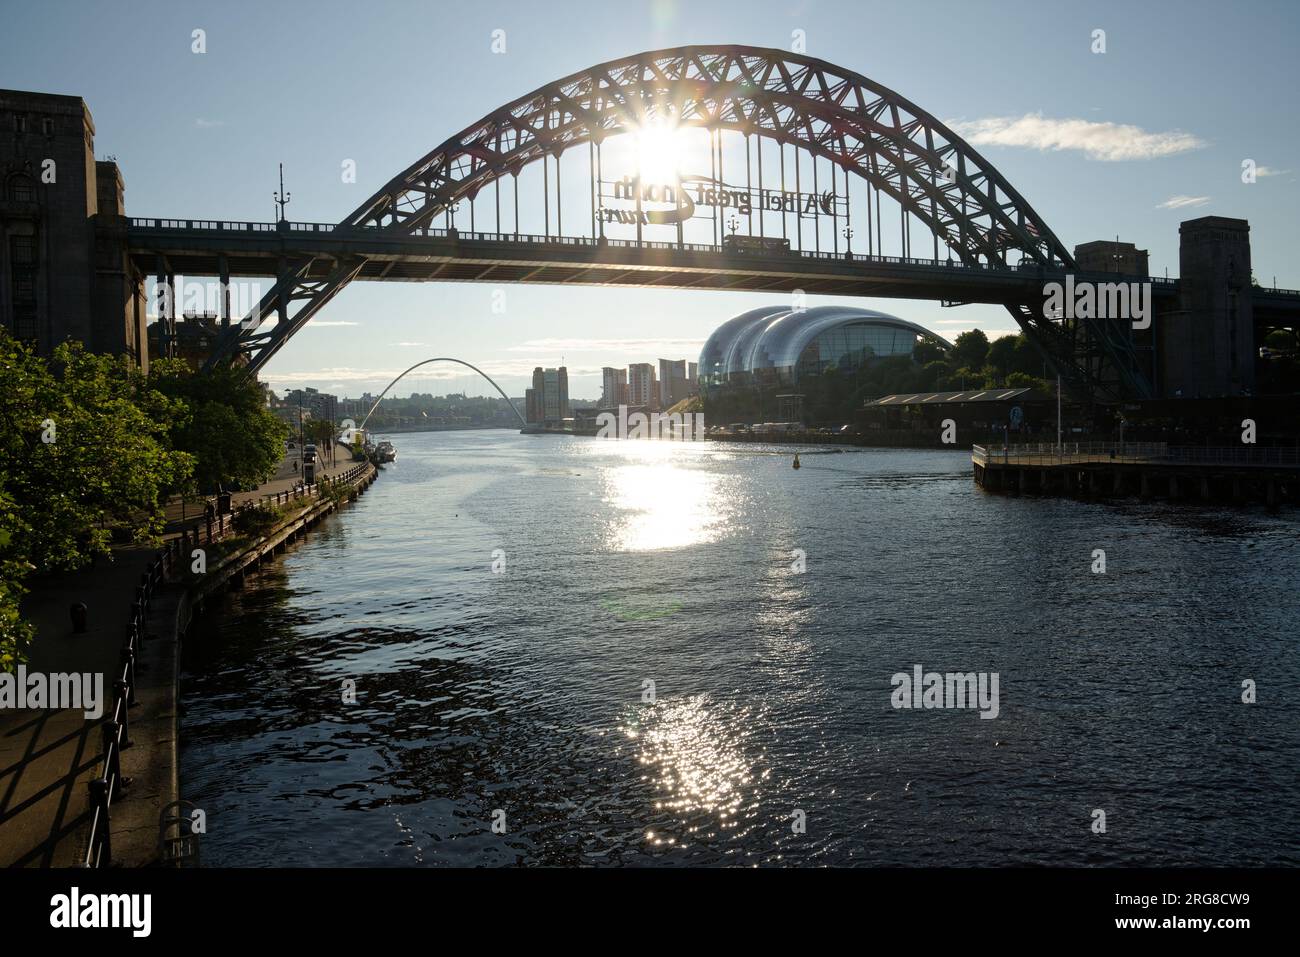 The Tyne Bridge in Newcastle officially named the George 5th bridge. An arch bridge over the river Tyne linking Newcastle to Gateshead. In the morning Stock Photo